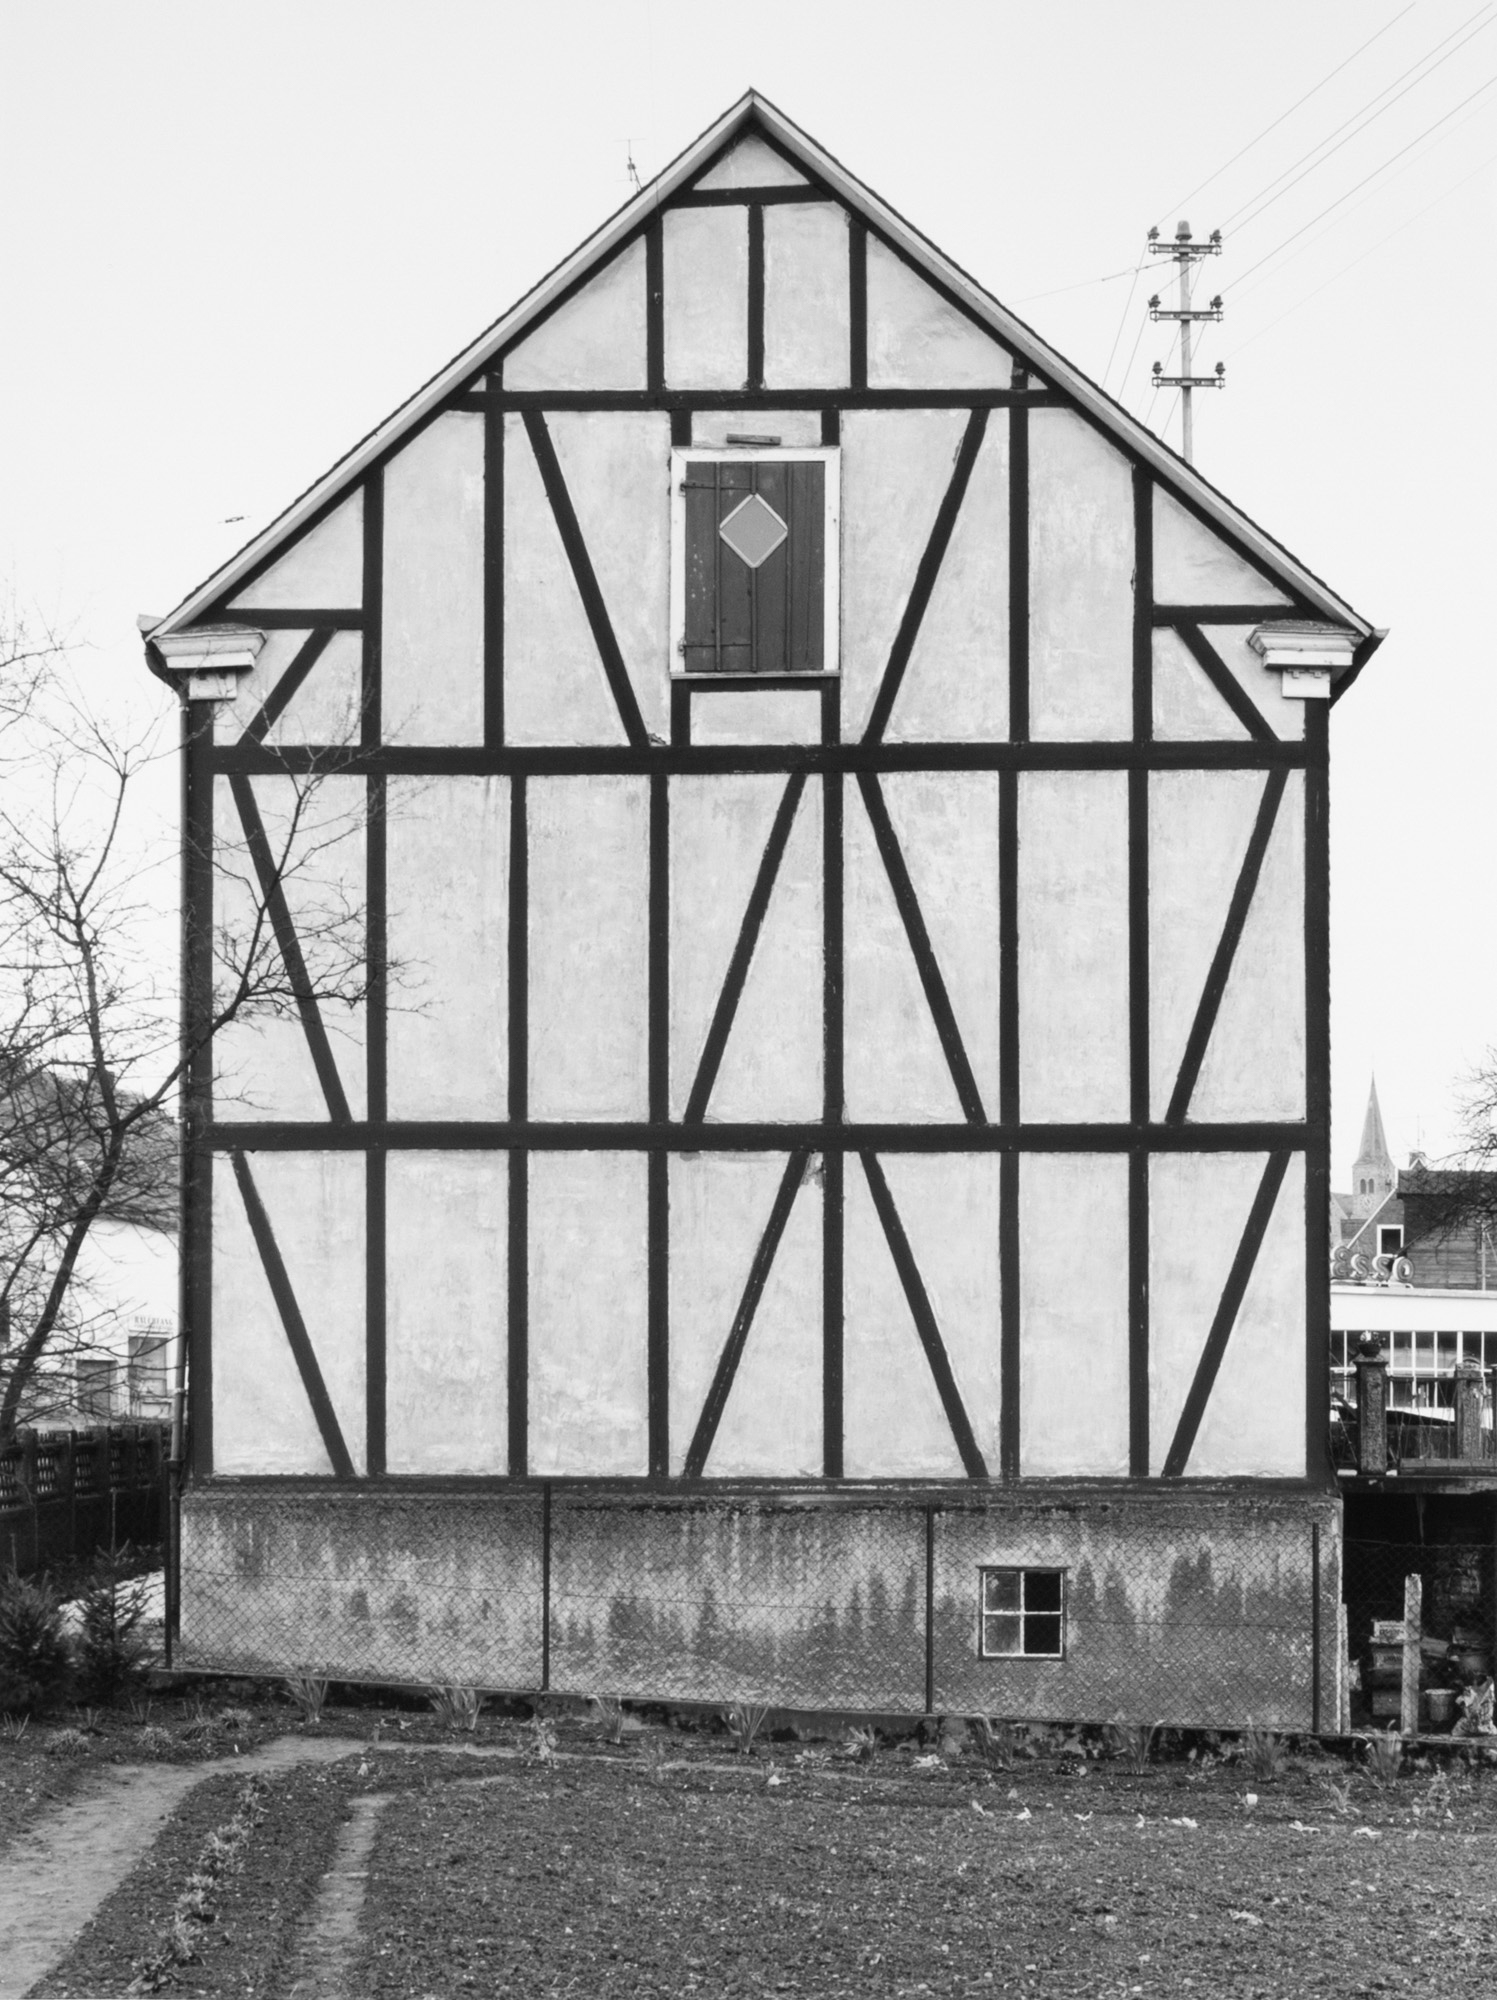 Black and white photograph of the exterior facade of a framework house